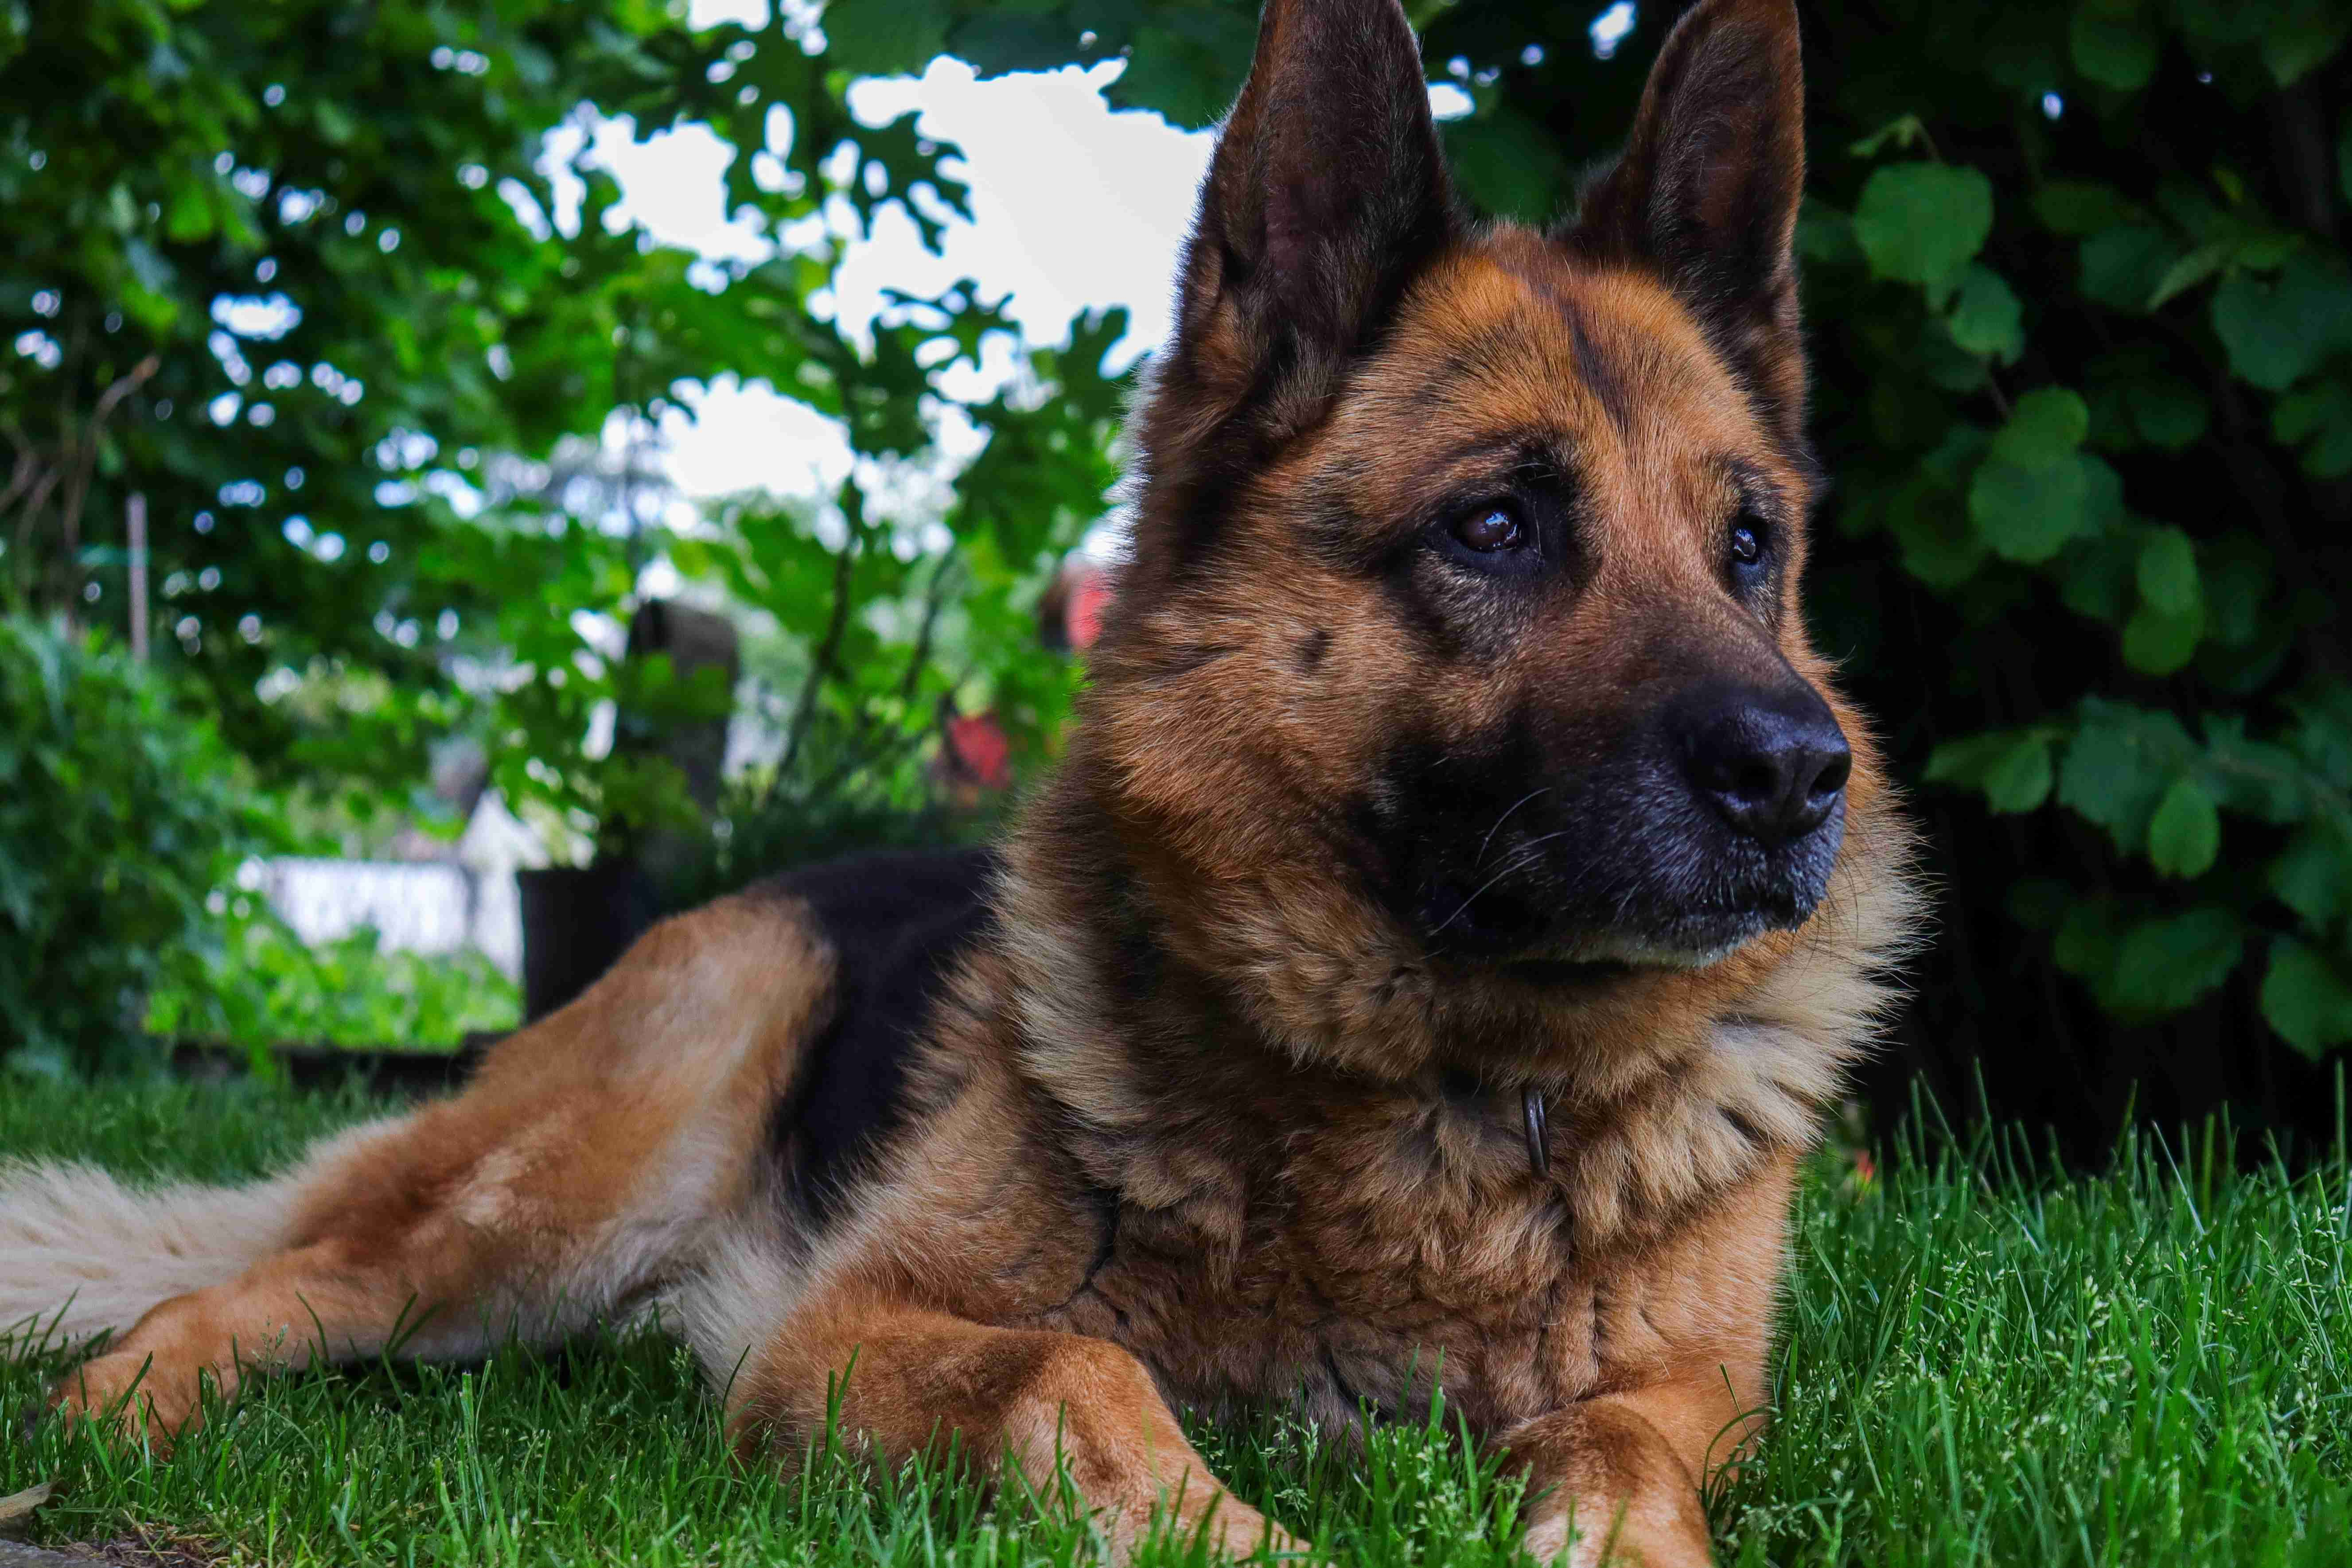 Can German shepherds be trained to become emotional support animals?